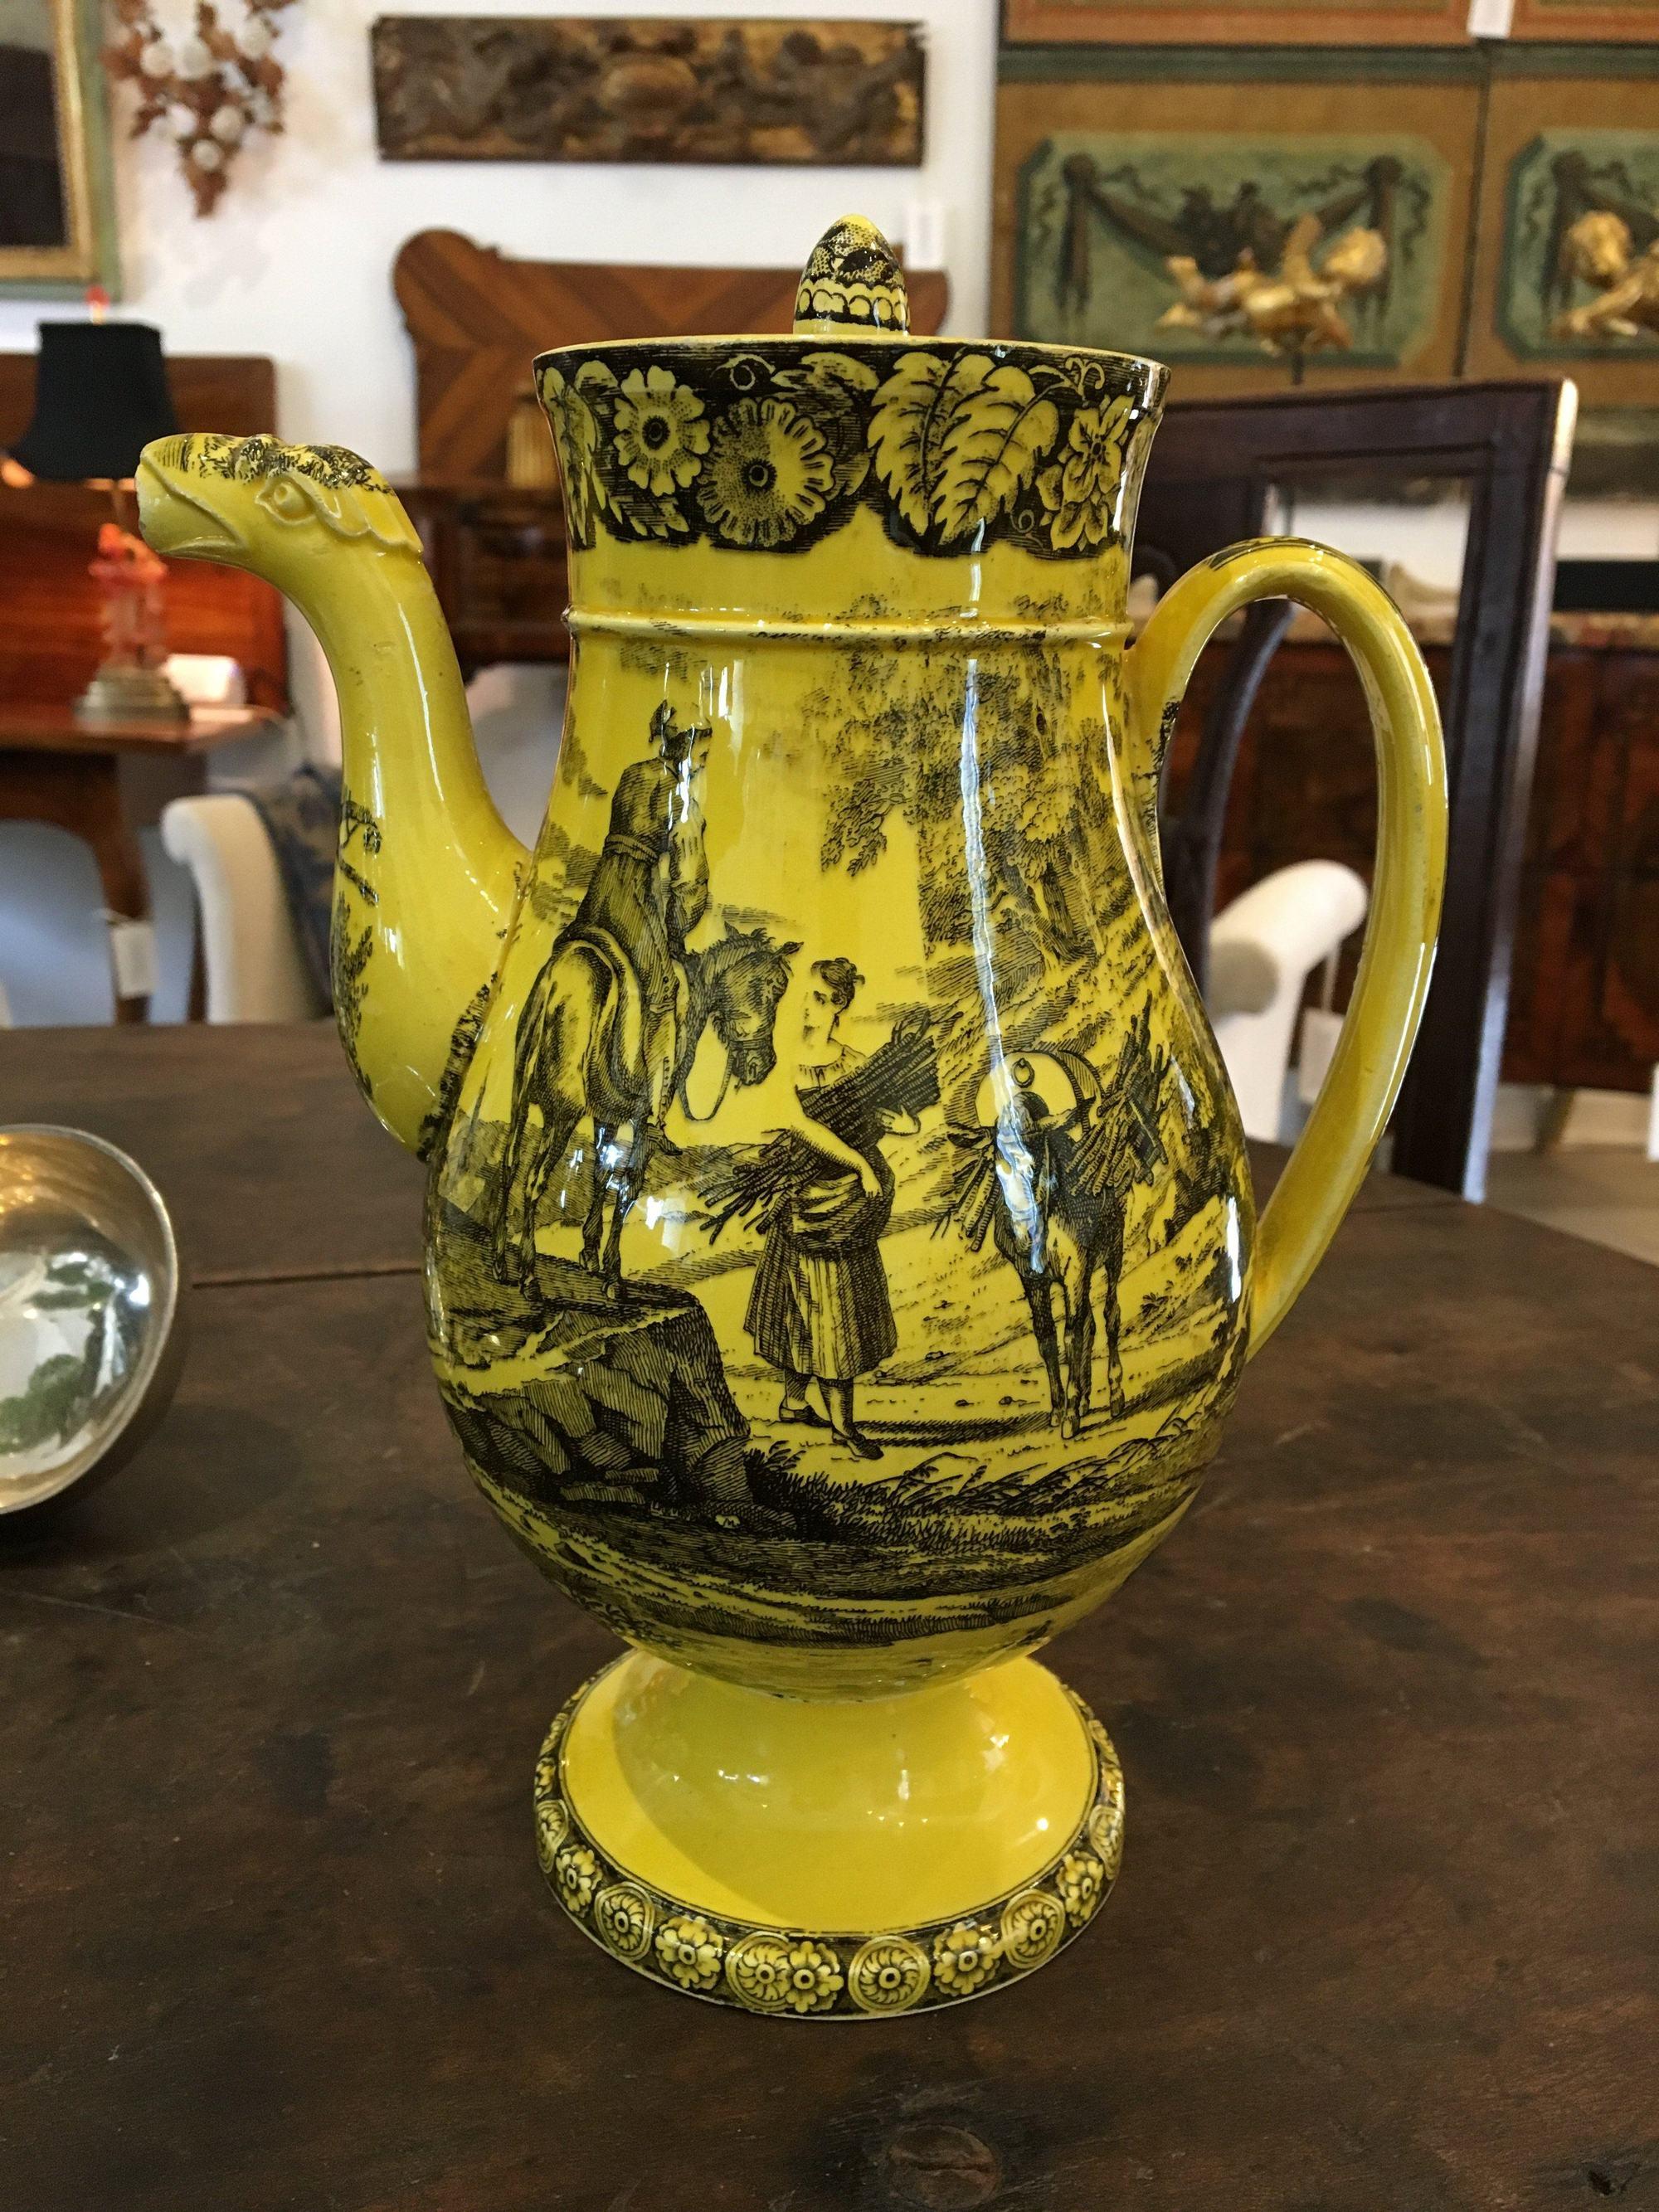 Rare Creil coffee pot in excellent condition, 1815-1820. No restorations, very slight fritting at spout.